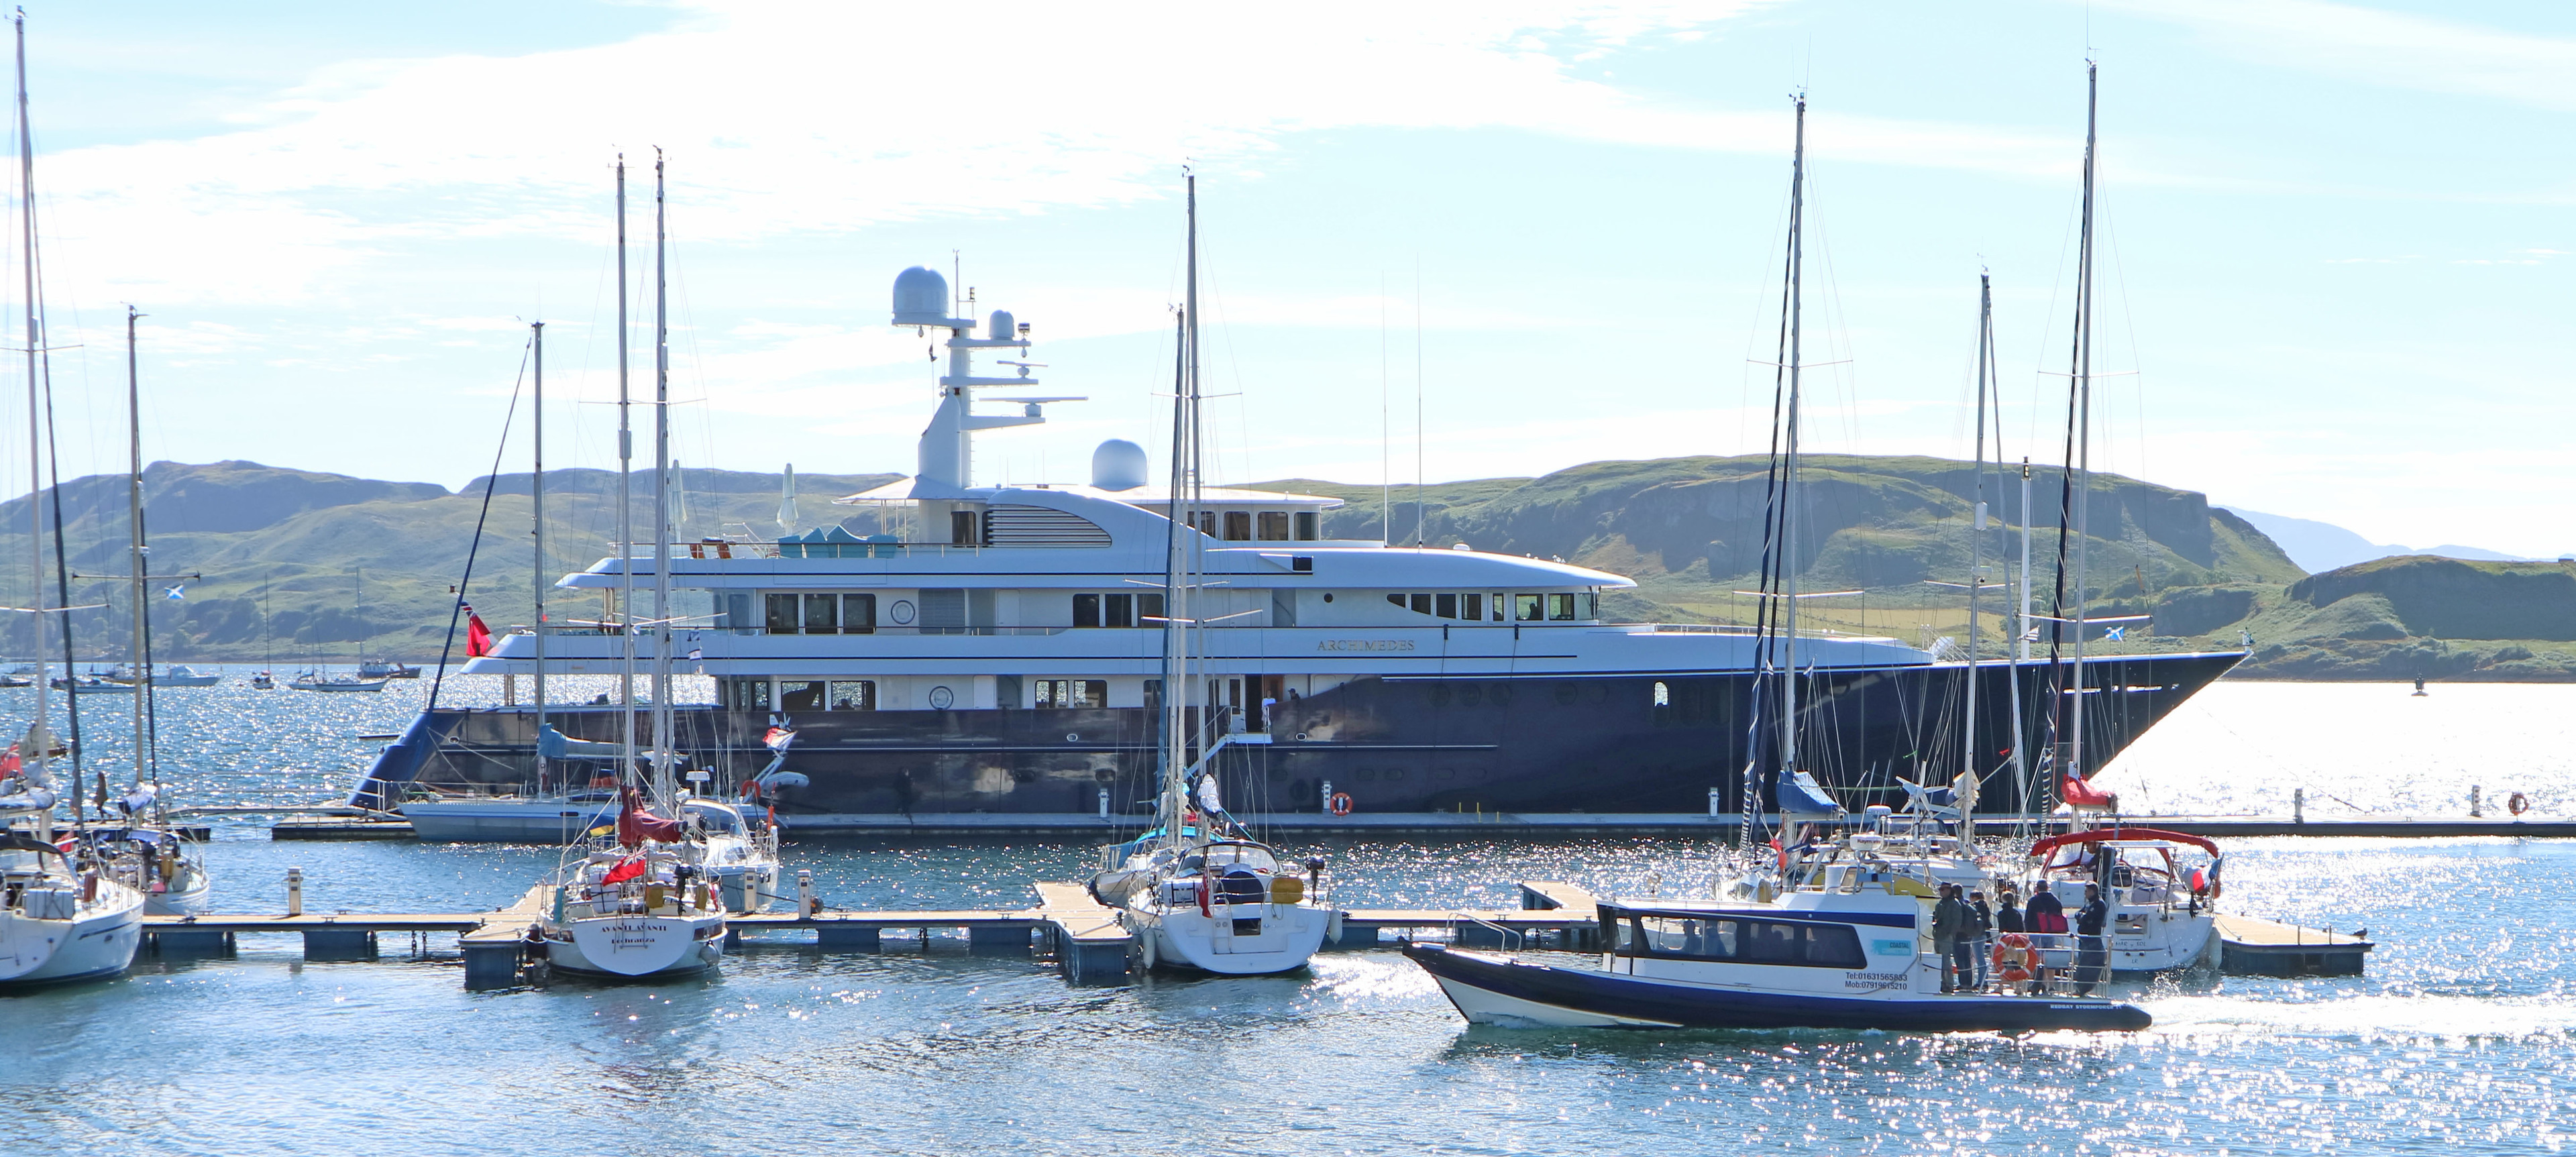 86M Long super yacht Archimedes lies against the breakwater Oban bay.